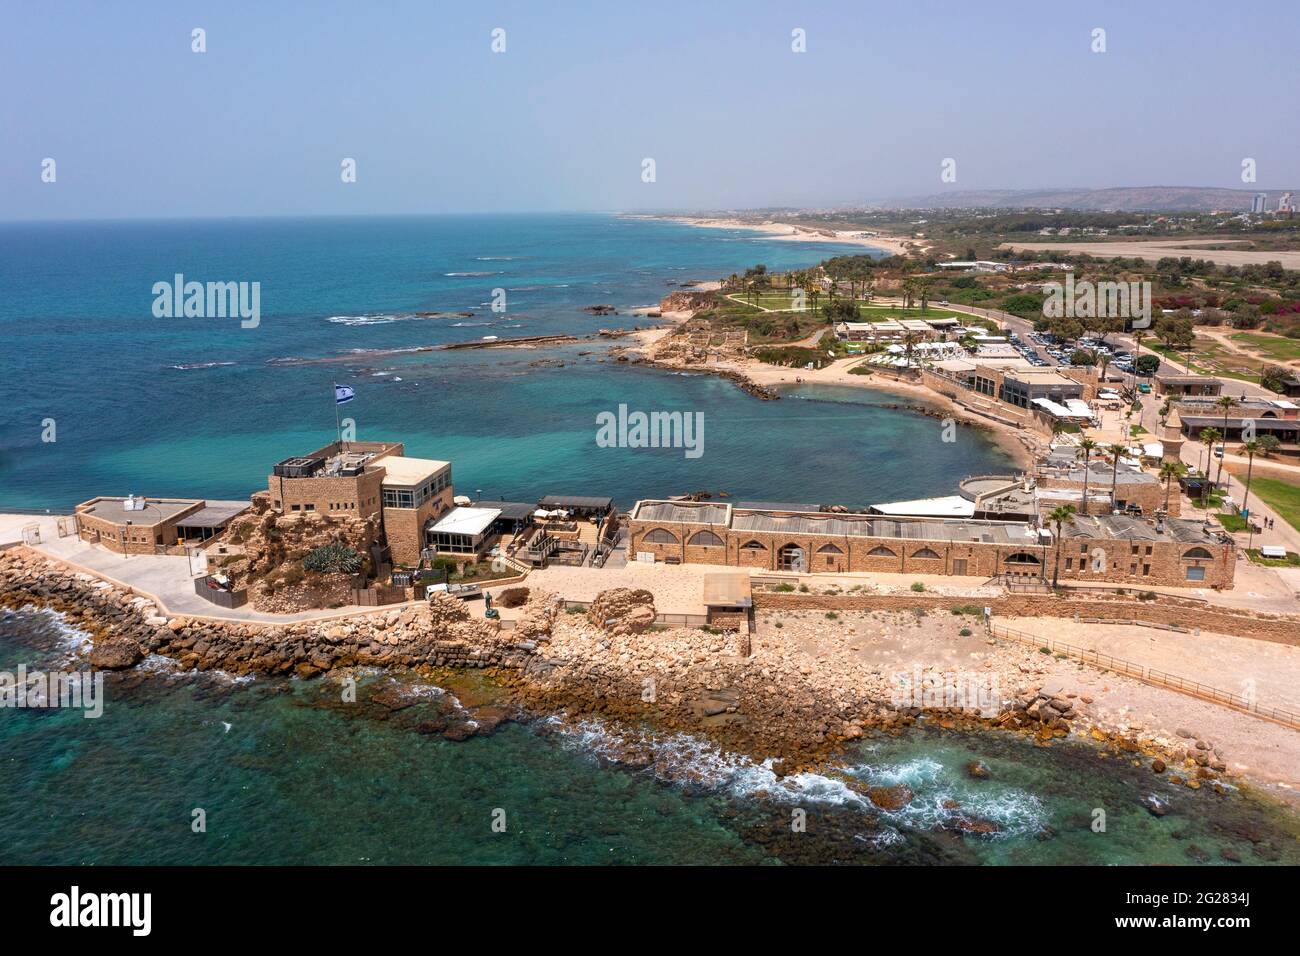 Caesarea ancient port, built by Herod the great, Aerial view. Stock Photo